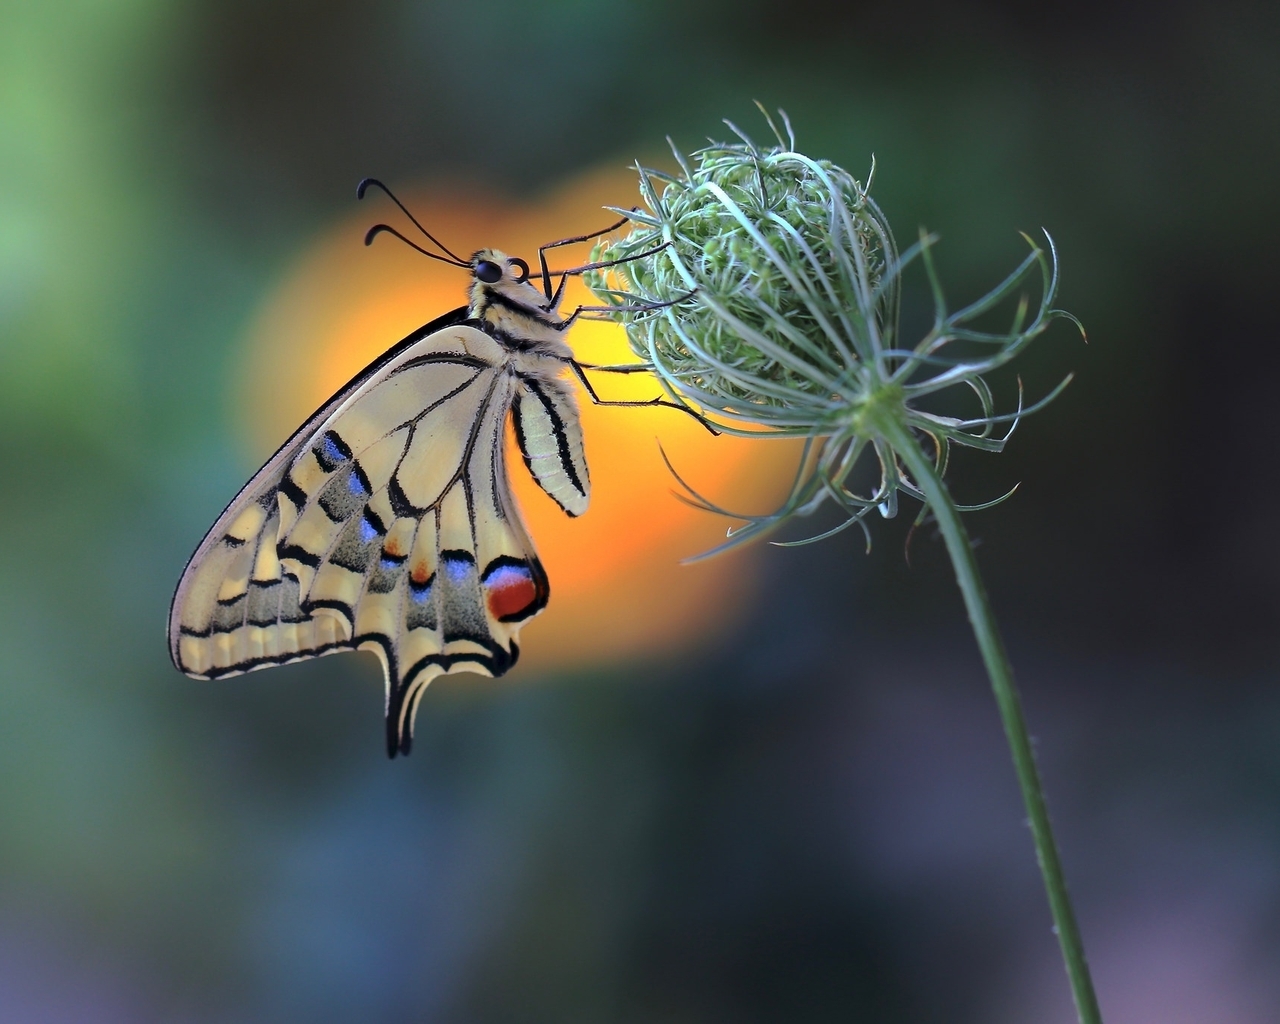 Image: Swallowtail, butterfly, color, wings, flower, bud, blurred background